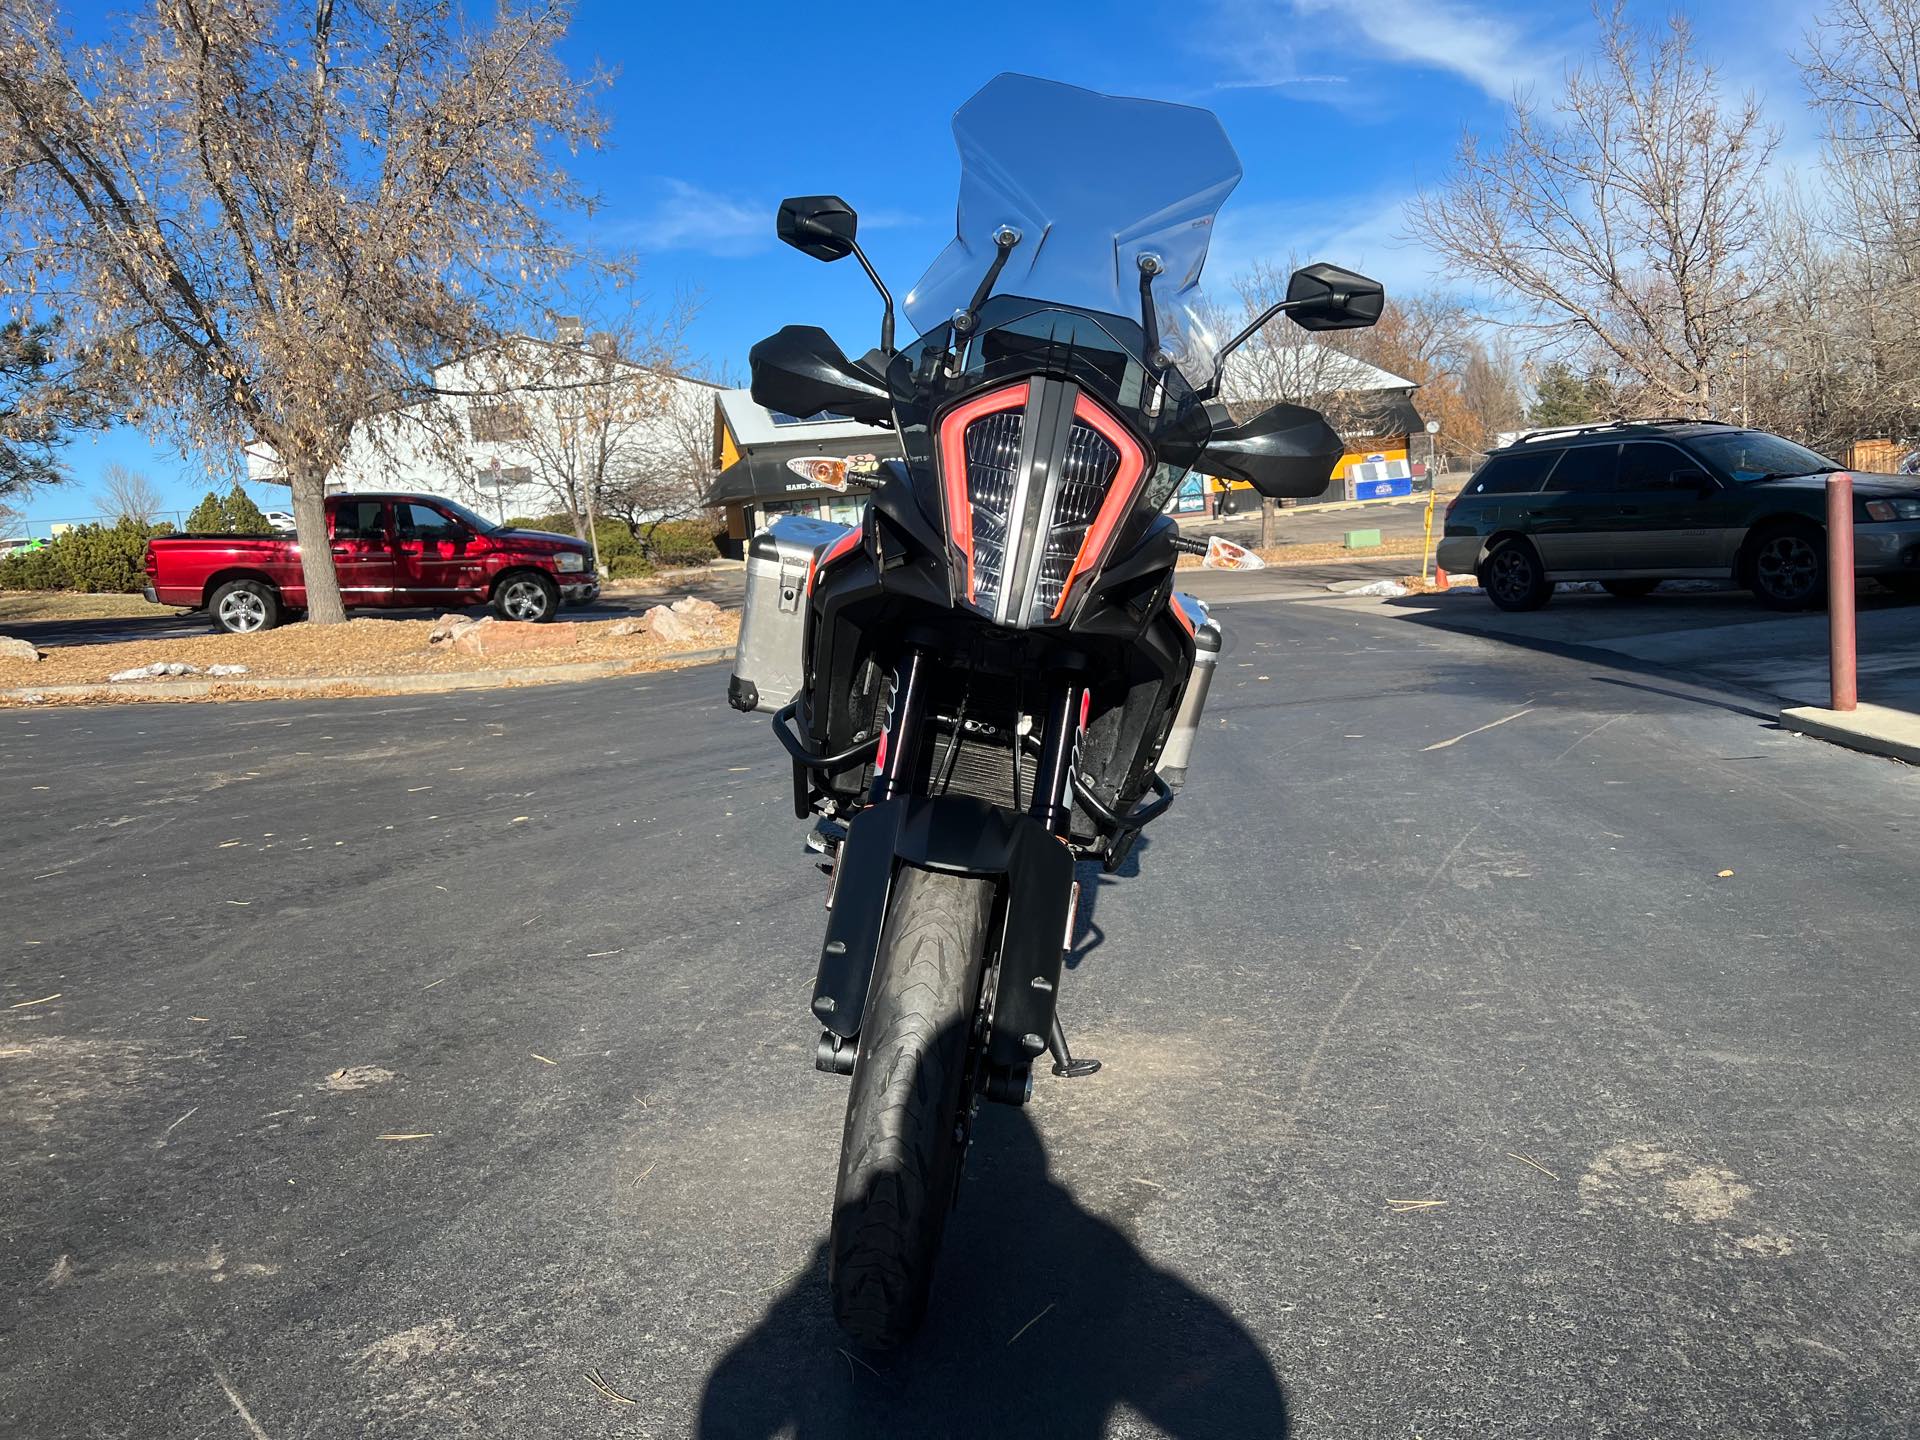 2019 KTM Super Adventure 1290 S at Aces Motorcycles - Fort Collins